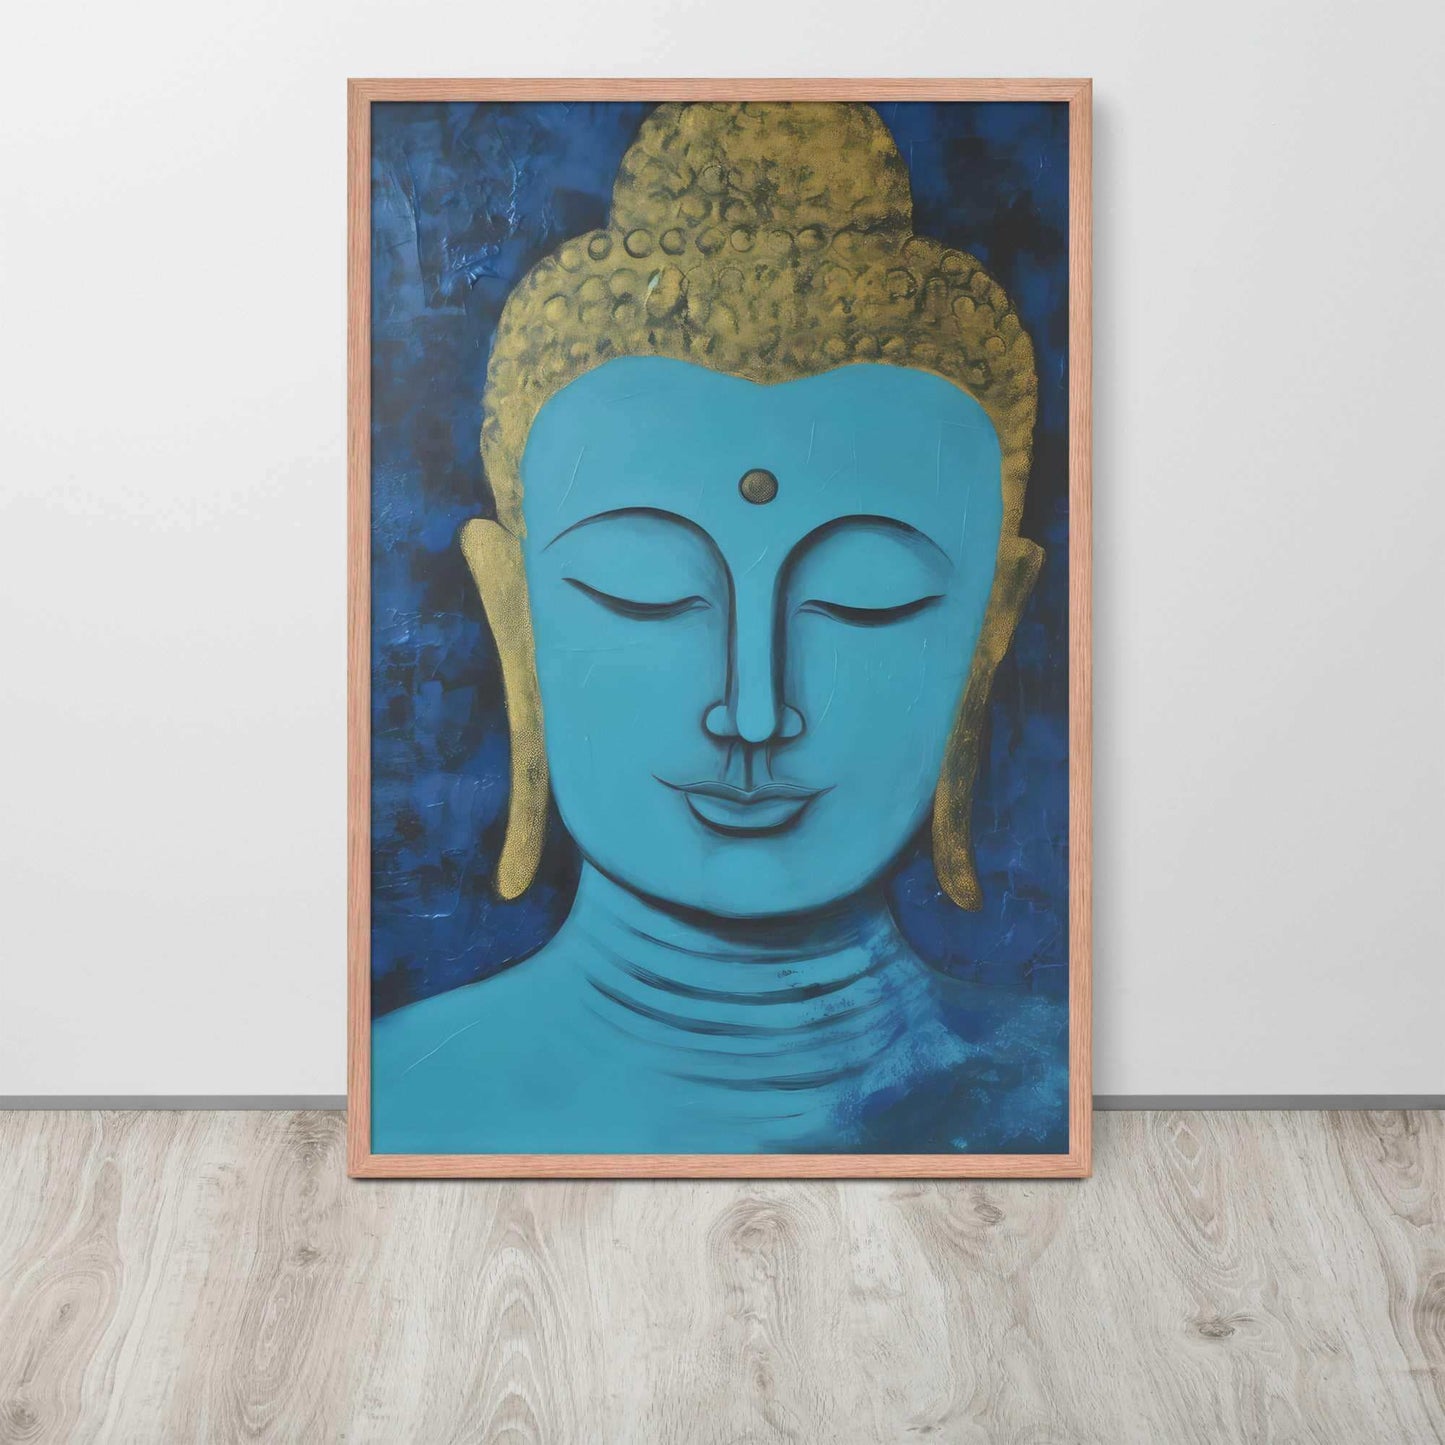 A framed poster with a red oak finish features a serene Blue Buddha Zen Wall Art with golden touches, set against a darker blue backdrop with a rich, textural finish, positioned on a light wooden floor by a plain white wall.